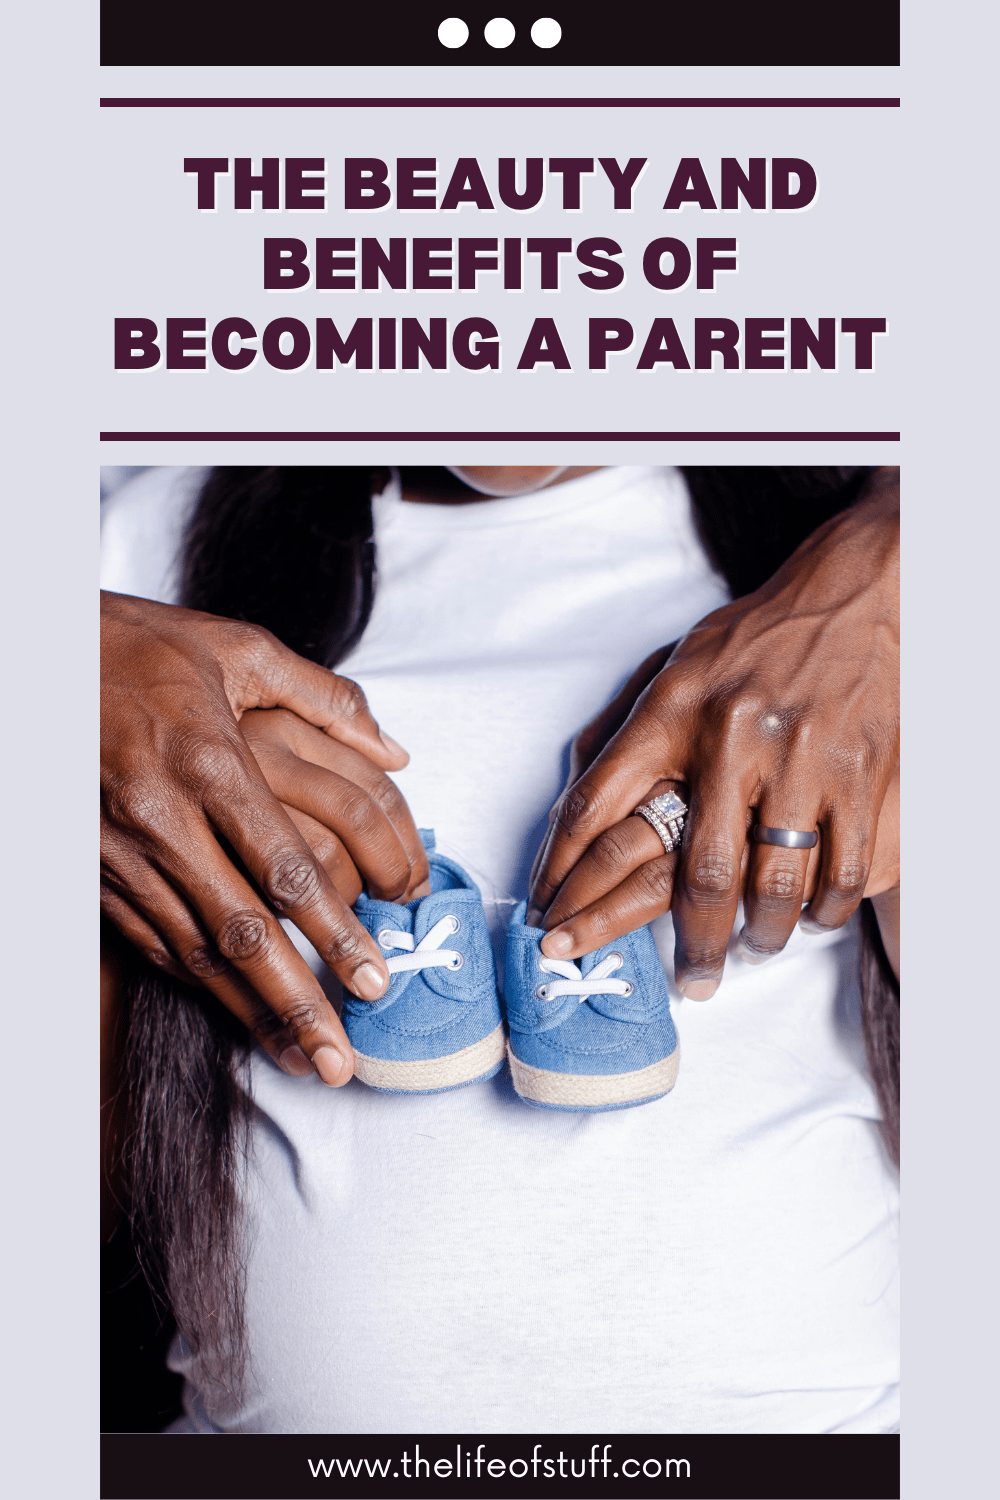 The Beauty and Benefits of Becoming a Parent - The Life of Stuff